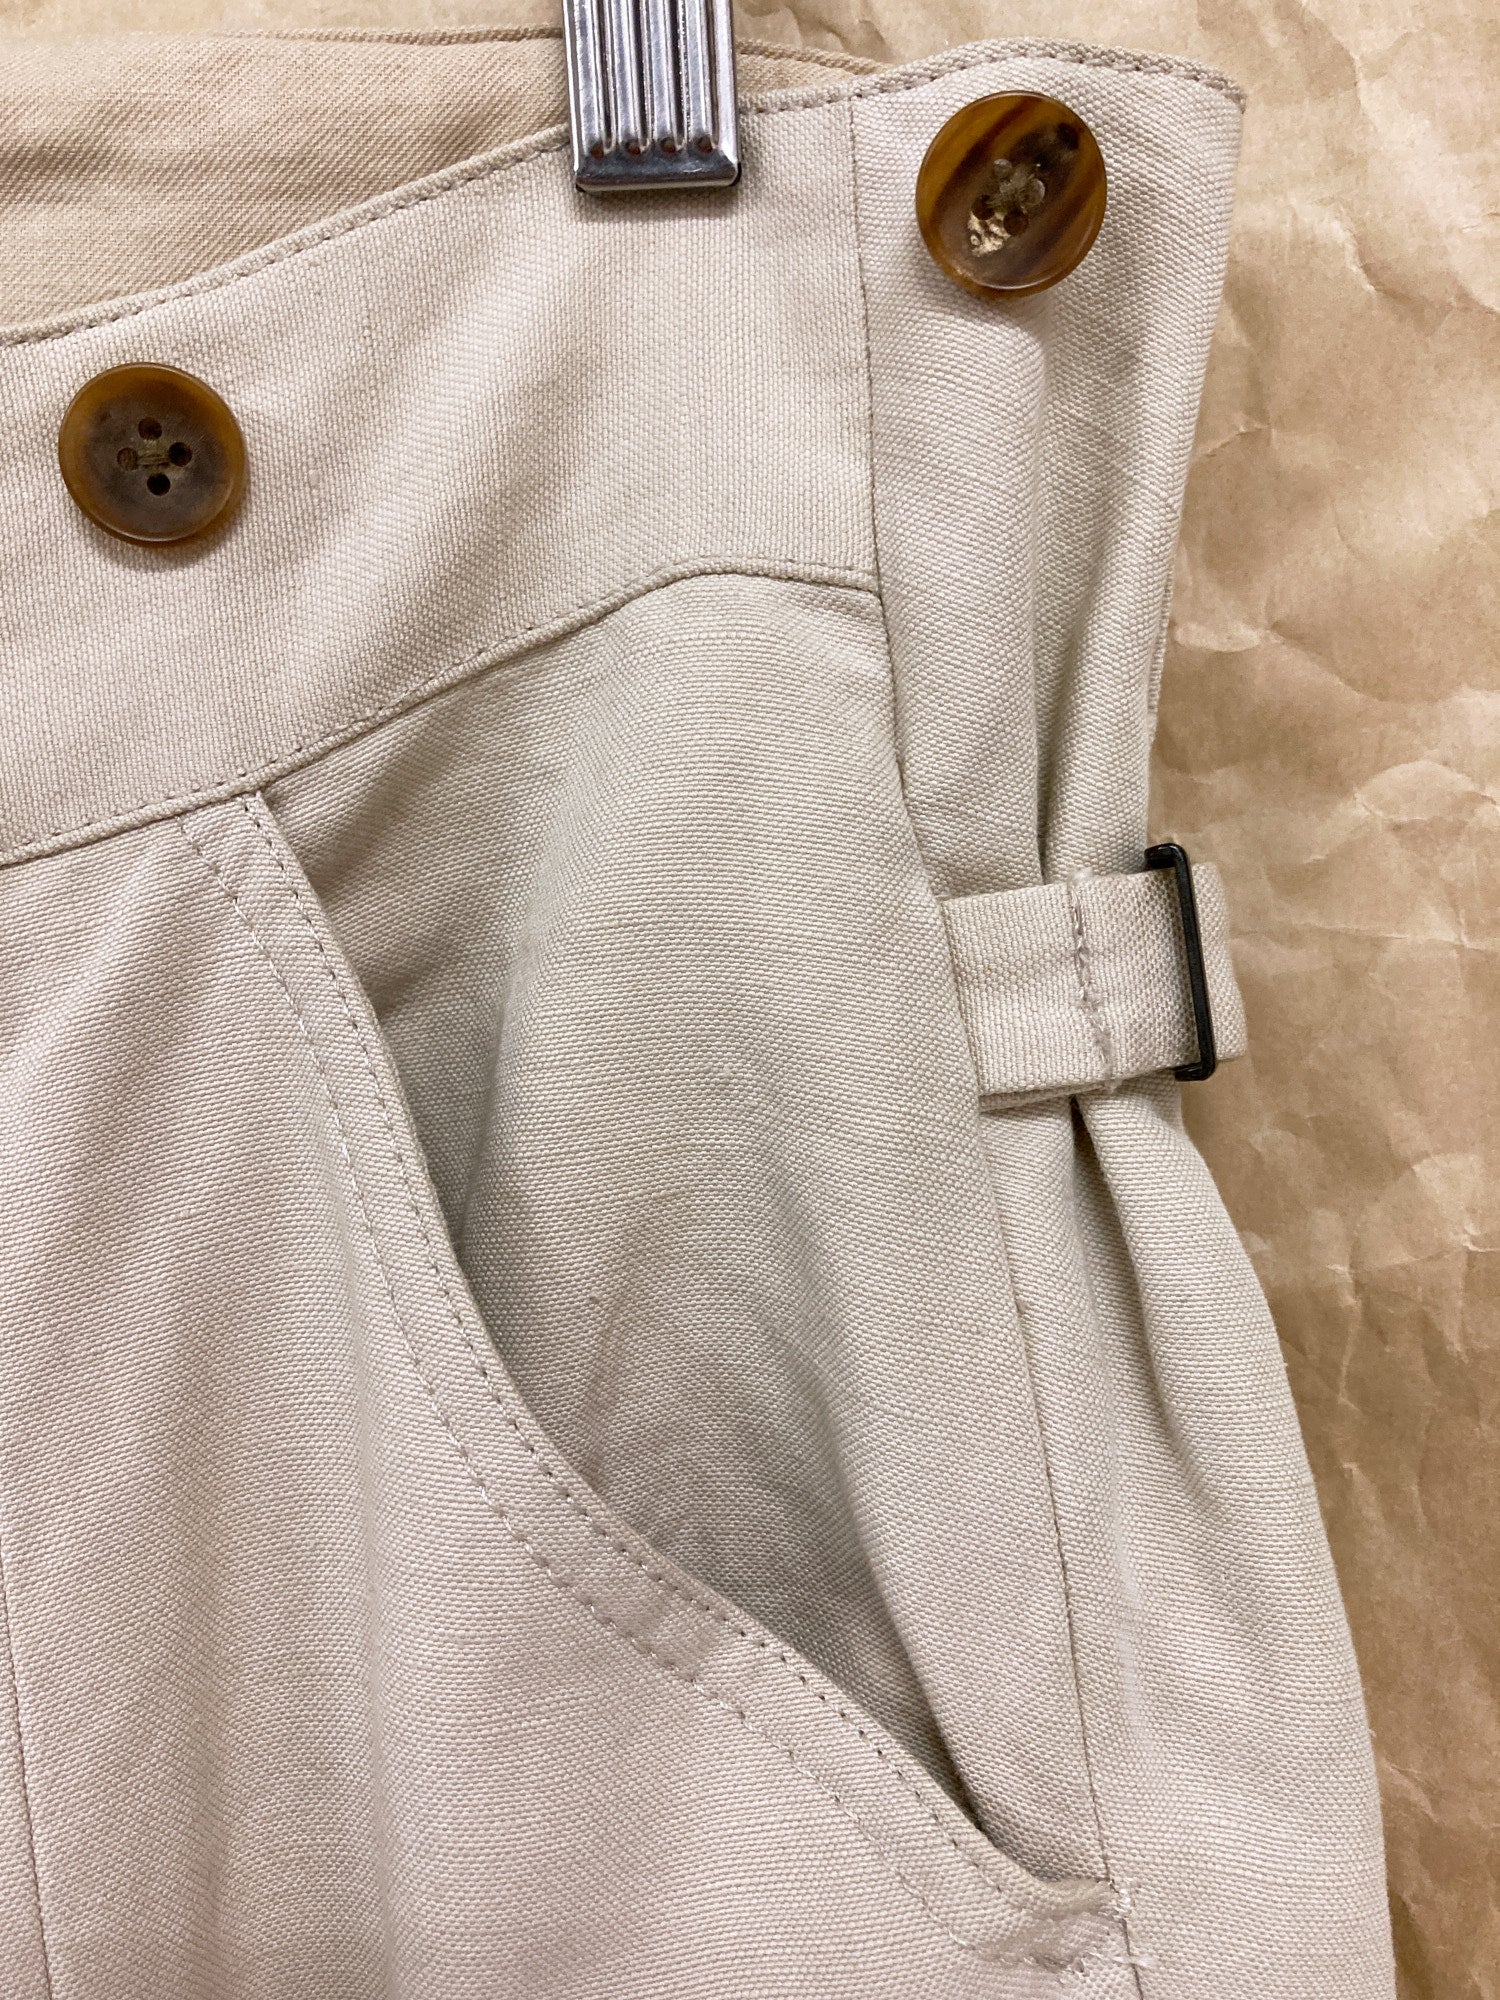 The Viridi-Anne beige off white ramie panelled side tab trousers